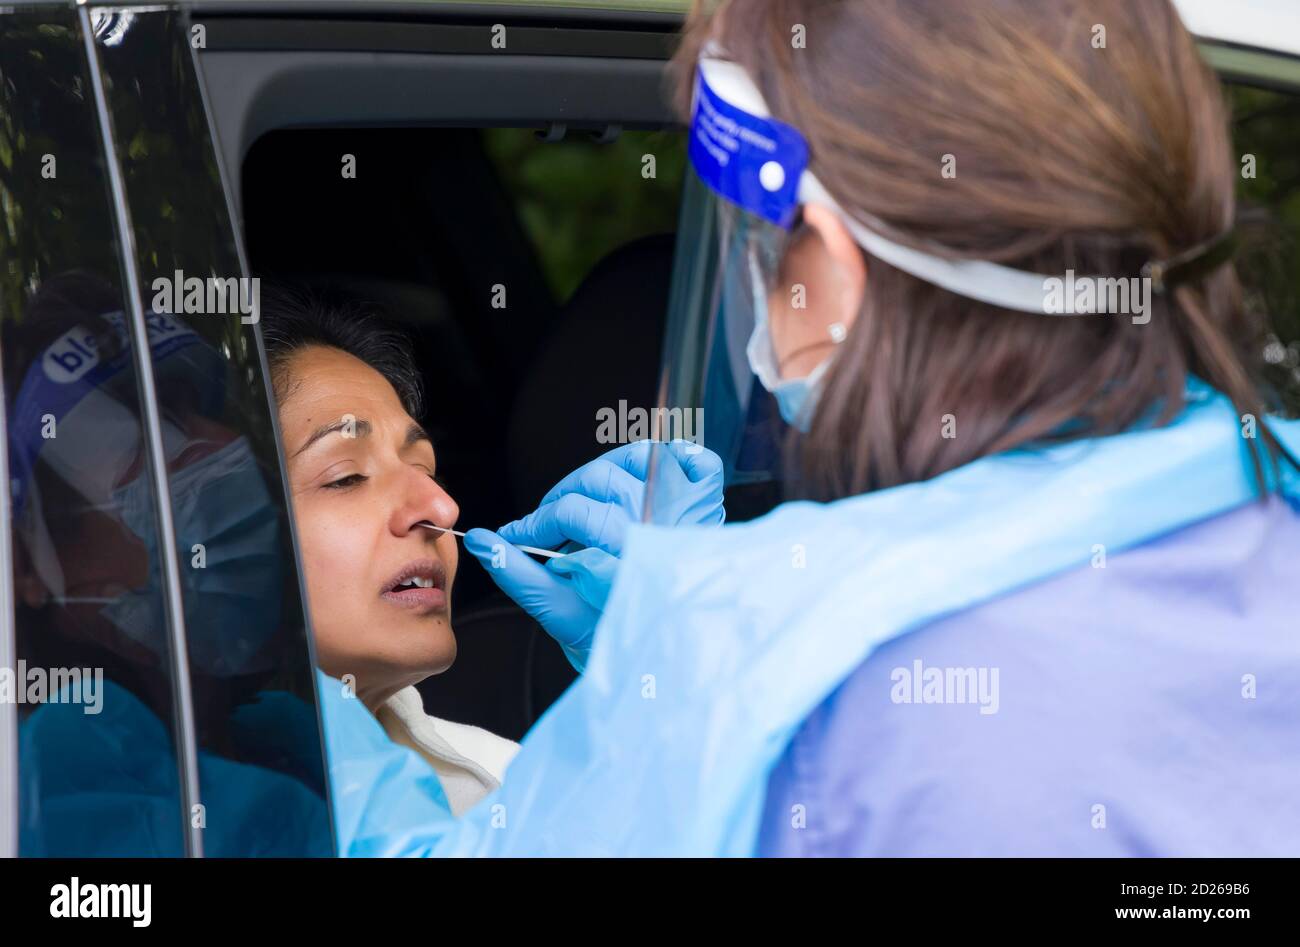 Asian woman in a car having a coronavirus nasal swab test with a nurse in PPE gear. England, UK Stock Photo